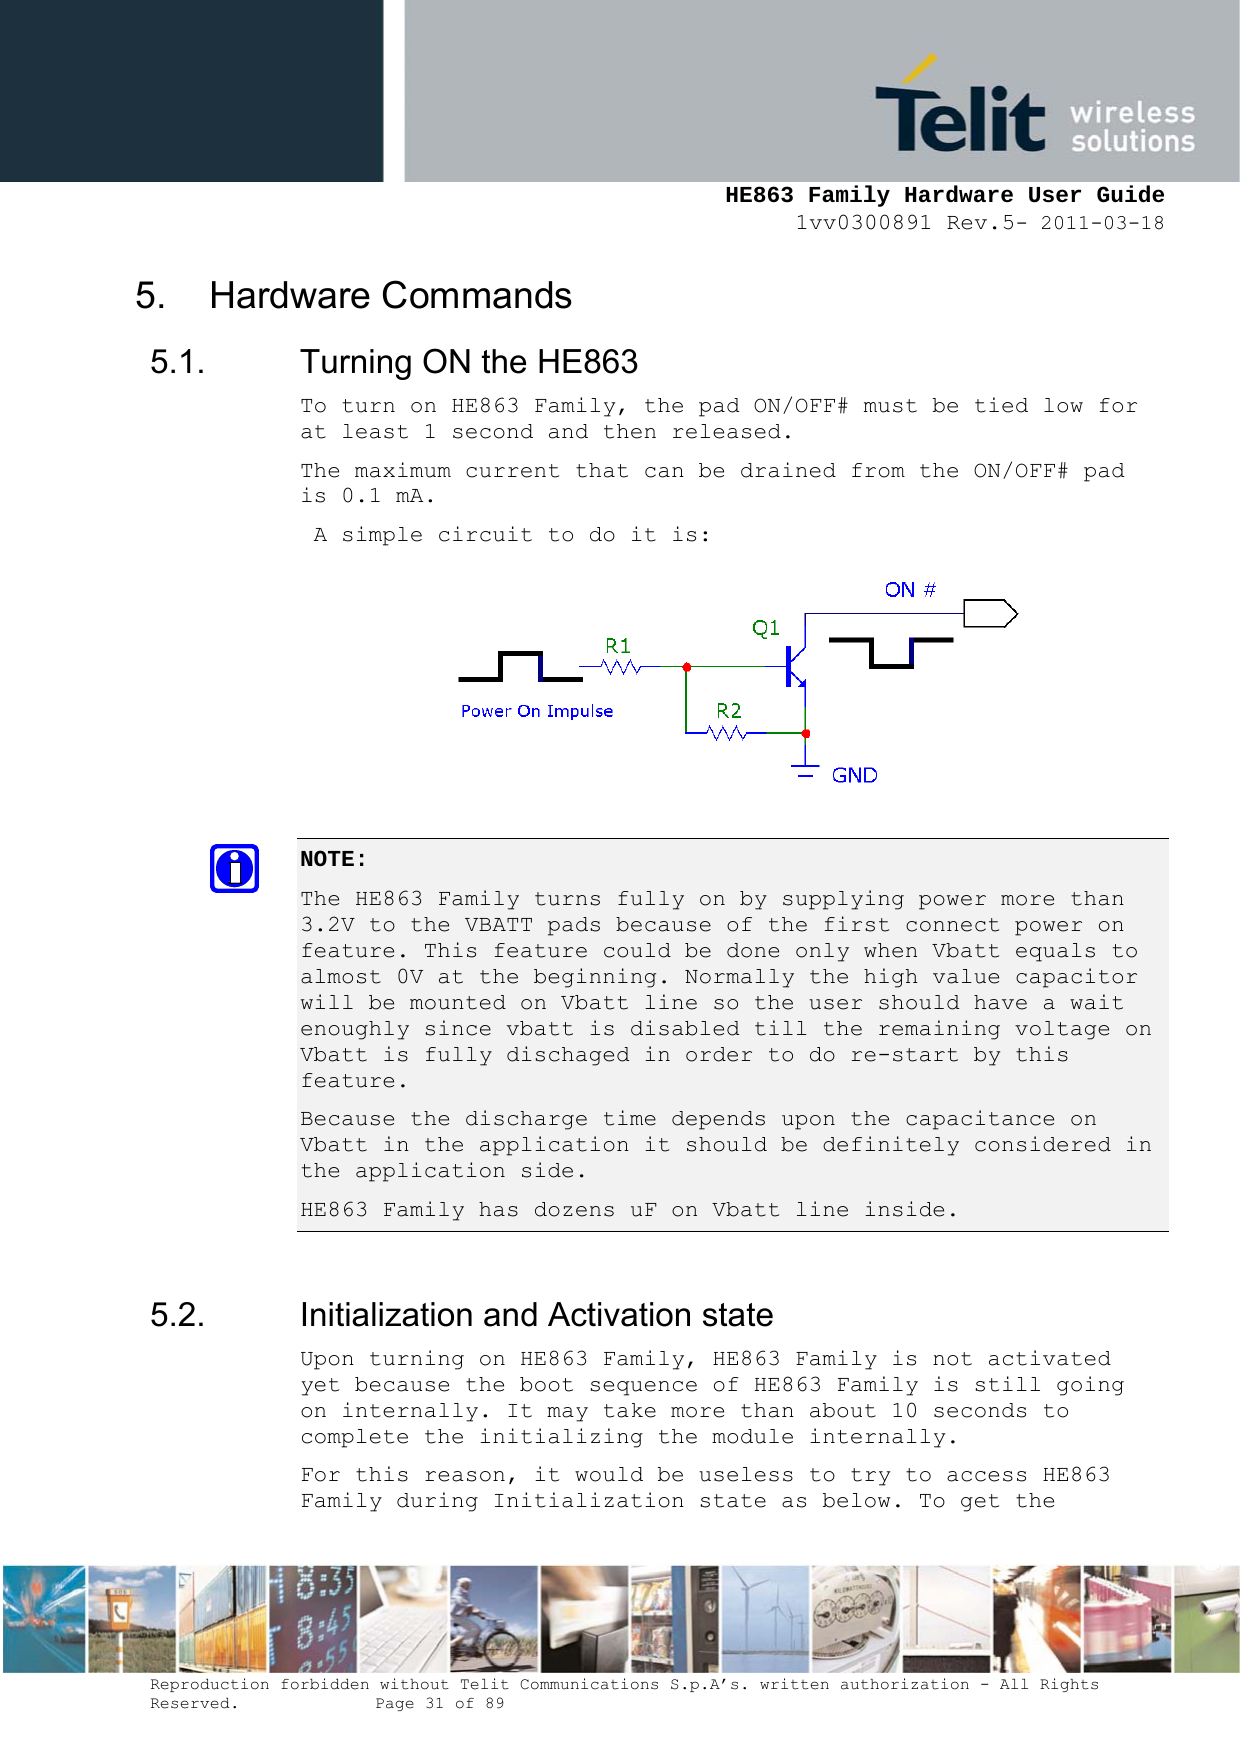     HE863 Family Hardware User Guide 1vv0300891 Rev.5- 2011-03-18    Reproduction forbidden without Telit Communications S.p.A’s. written authorization - All Rights Reserved.    Page 31 of 89  5. Hardware Commands 5.1.  Turning ON the HE863 To turn on HE863 Family, the pad ON/OFF# must be tied low for at least 1 second and then released. The maximum current that can be drained from the ON/OFF# pad is 0.1 mA.  A simple circuit to do it is:  NOTE:  The HE863 Family turns fully on by supplying power more than 3.2V to the VBATT pads because of the first connect power on feature. This feature could be done only when Vbatt equals to almost 0V at the beginning. Normally the high value capacitor will be mounted on Vbatt line so the user should have a wait enoughly since vbatt is disabled till the remaining voltage on Vbatt is fully dischaged in order to do re-start by this feature. Because the discharge time depends upon the capacitance on Vbatt in the application it should be definitely considered in the application side. HE863 Family has dozens uF on Vbatt line inside.  5.2.  Initialization and Activation state Upon turning on HE863 Family, HE863 Family is not activated yet because the boot sequence of HE863 Family is still going on internally. It may take more than about 10 seconds to complete the initializing the module internally. For this reason, it would be useless to try to access HE863 Family during Initialization state as below. To get the 